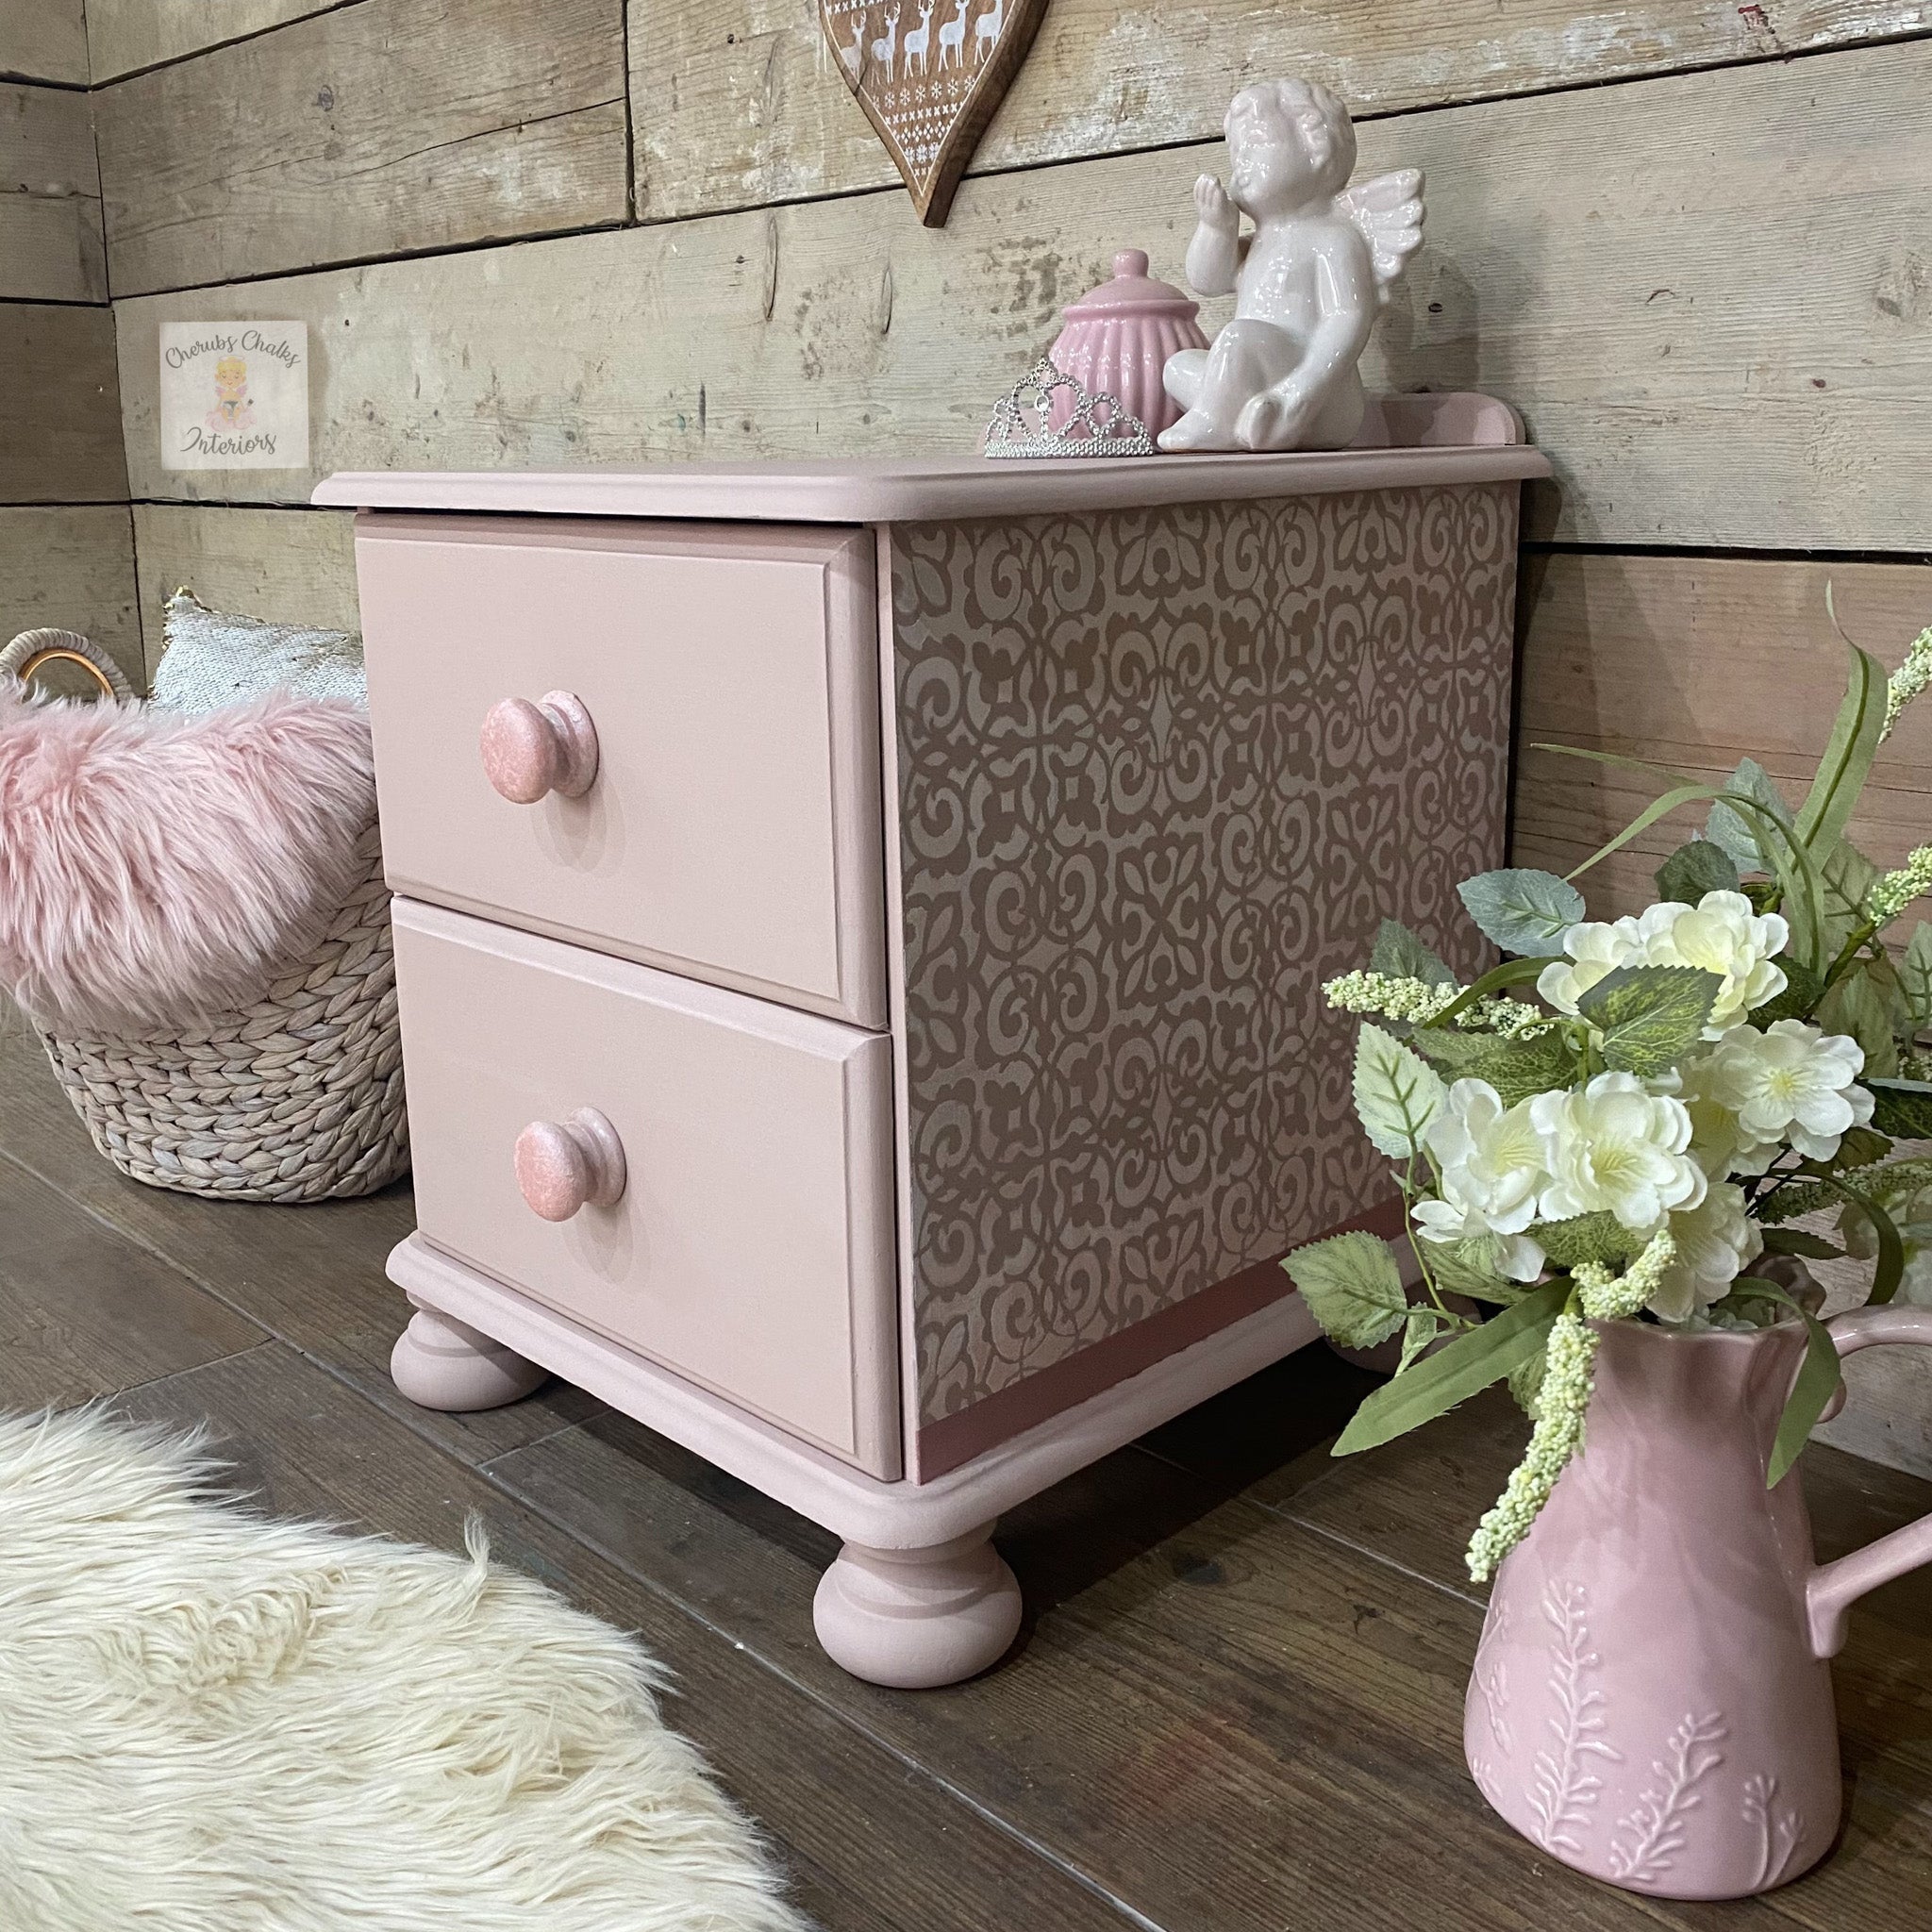 A vintage child's 2-drawer nightstand refurbished by Cherubs Chalks Interiors is painted in Dixie Belle's Soft Pink chalk mineral paint.